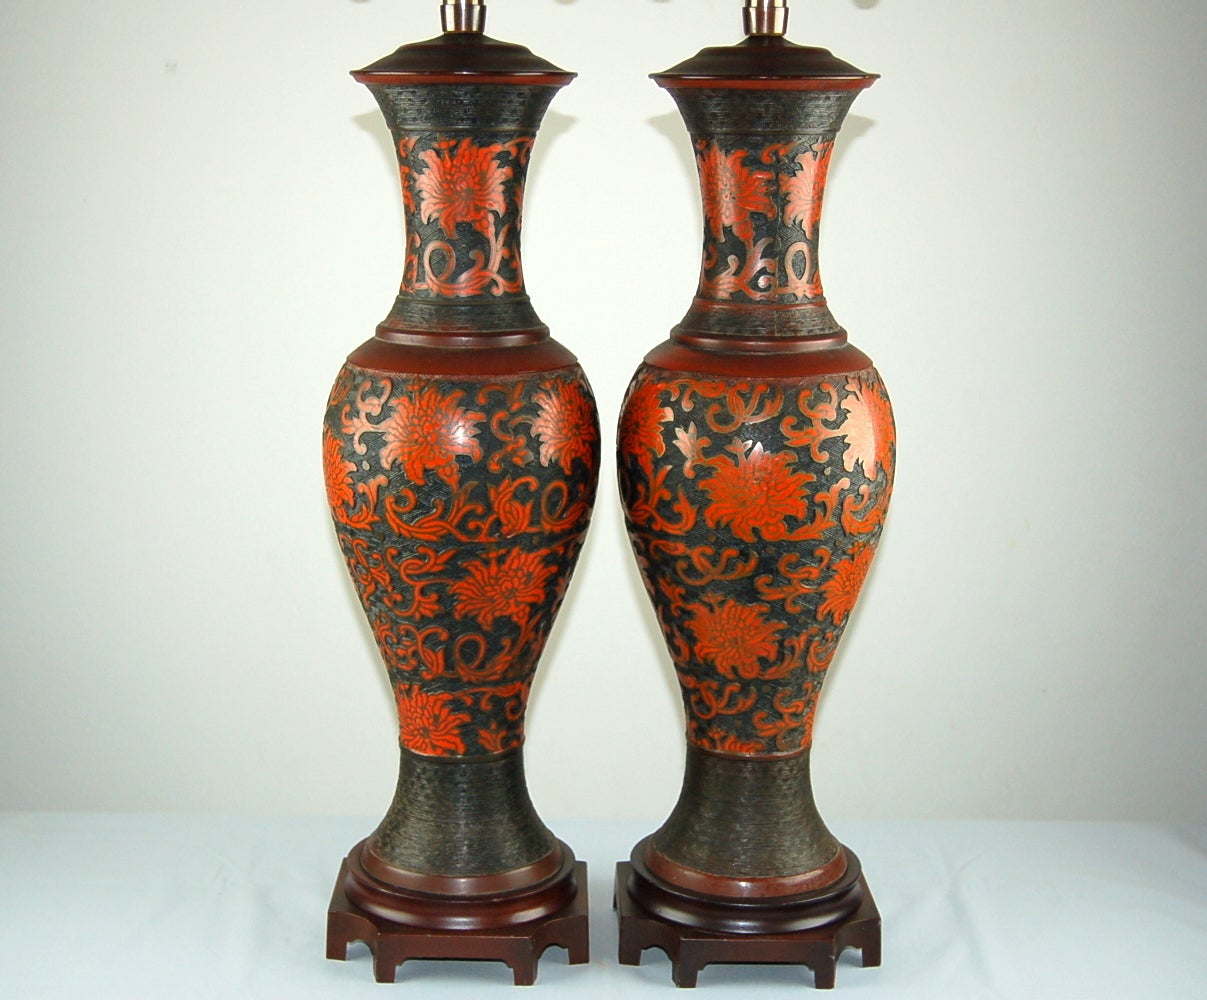 Chinese Matched Pair of Vintage Cloisonné Brass Lamps in Vermillion by Marbro For Sale